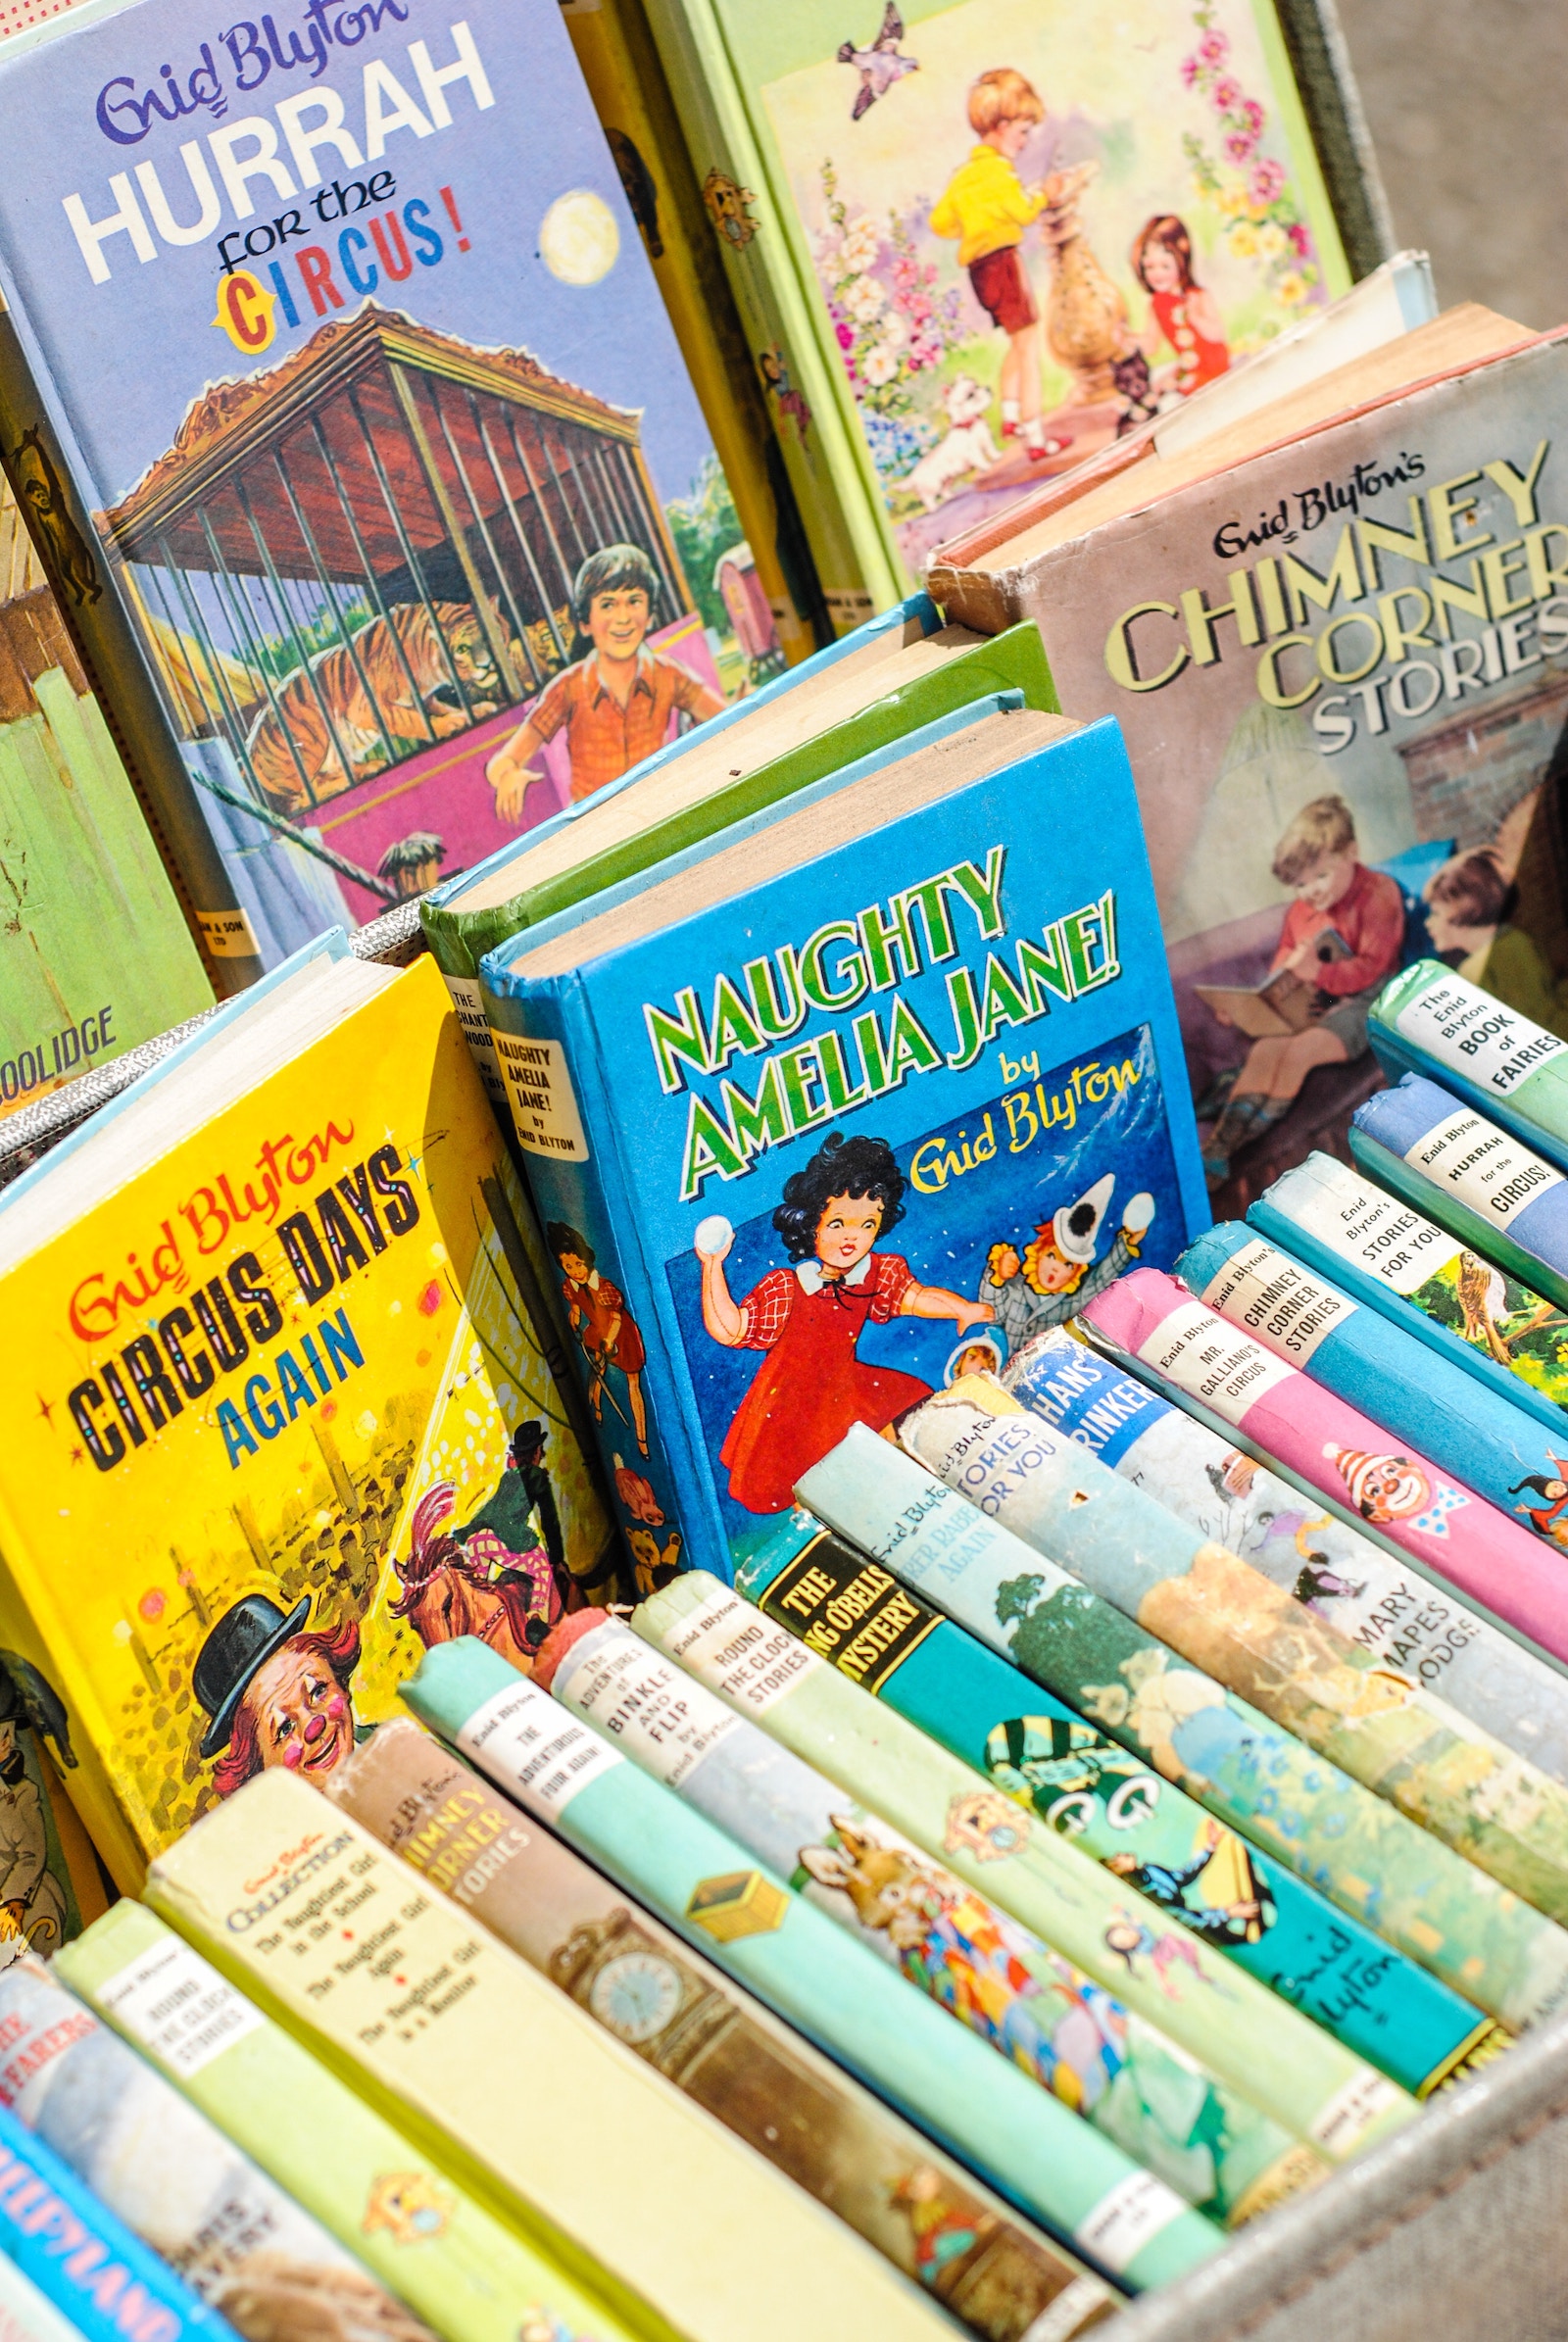 Used Book Sale featuring Children’s Books